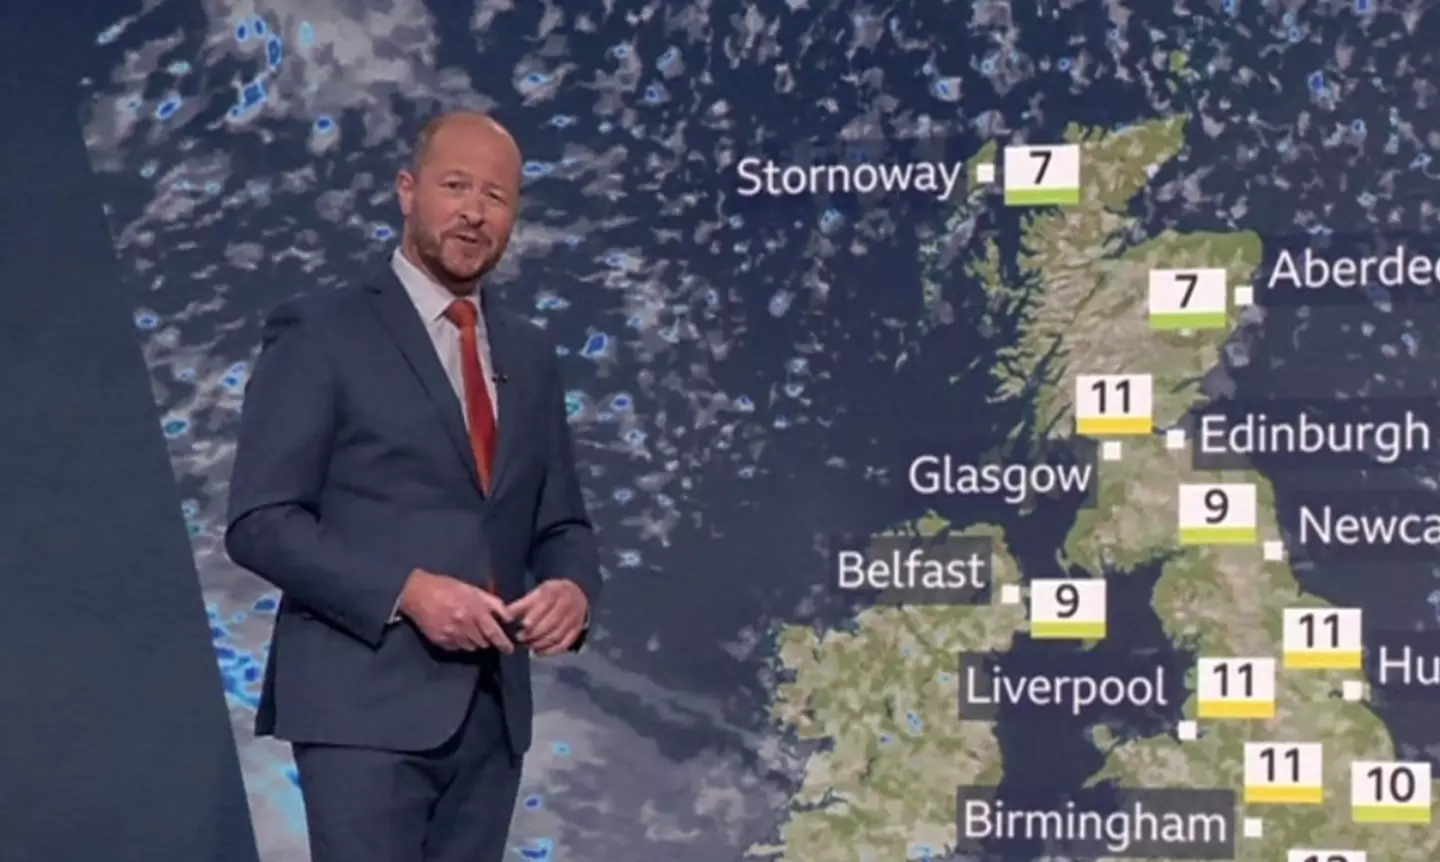 Darren Bett made a subtle tribute to Len during the weather report.